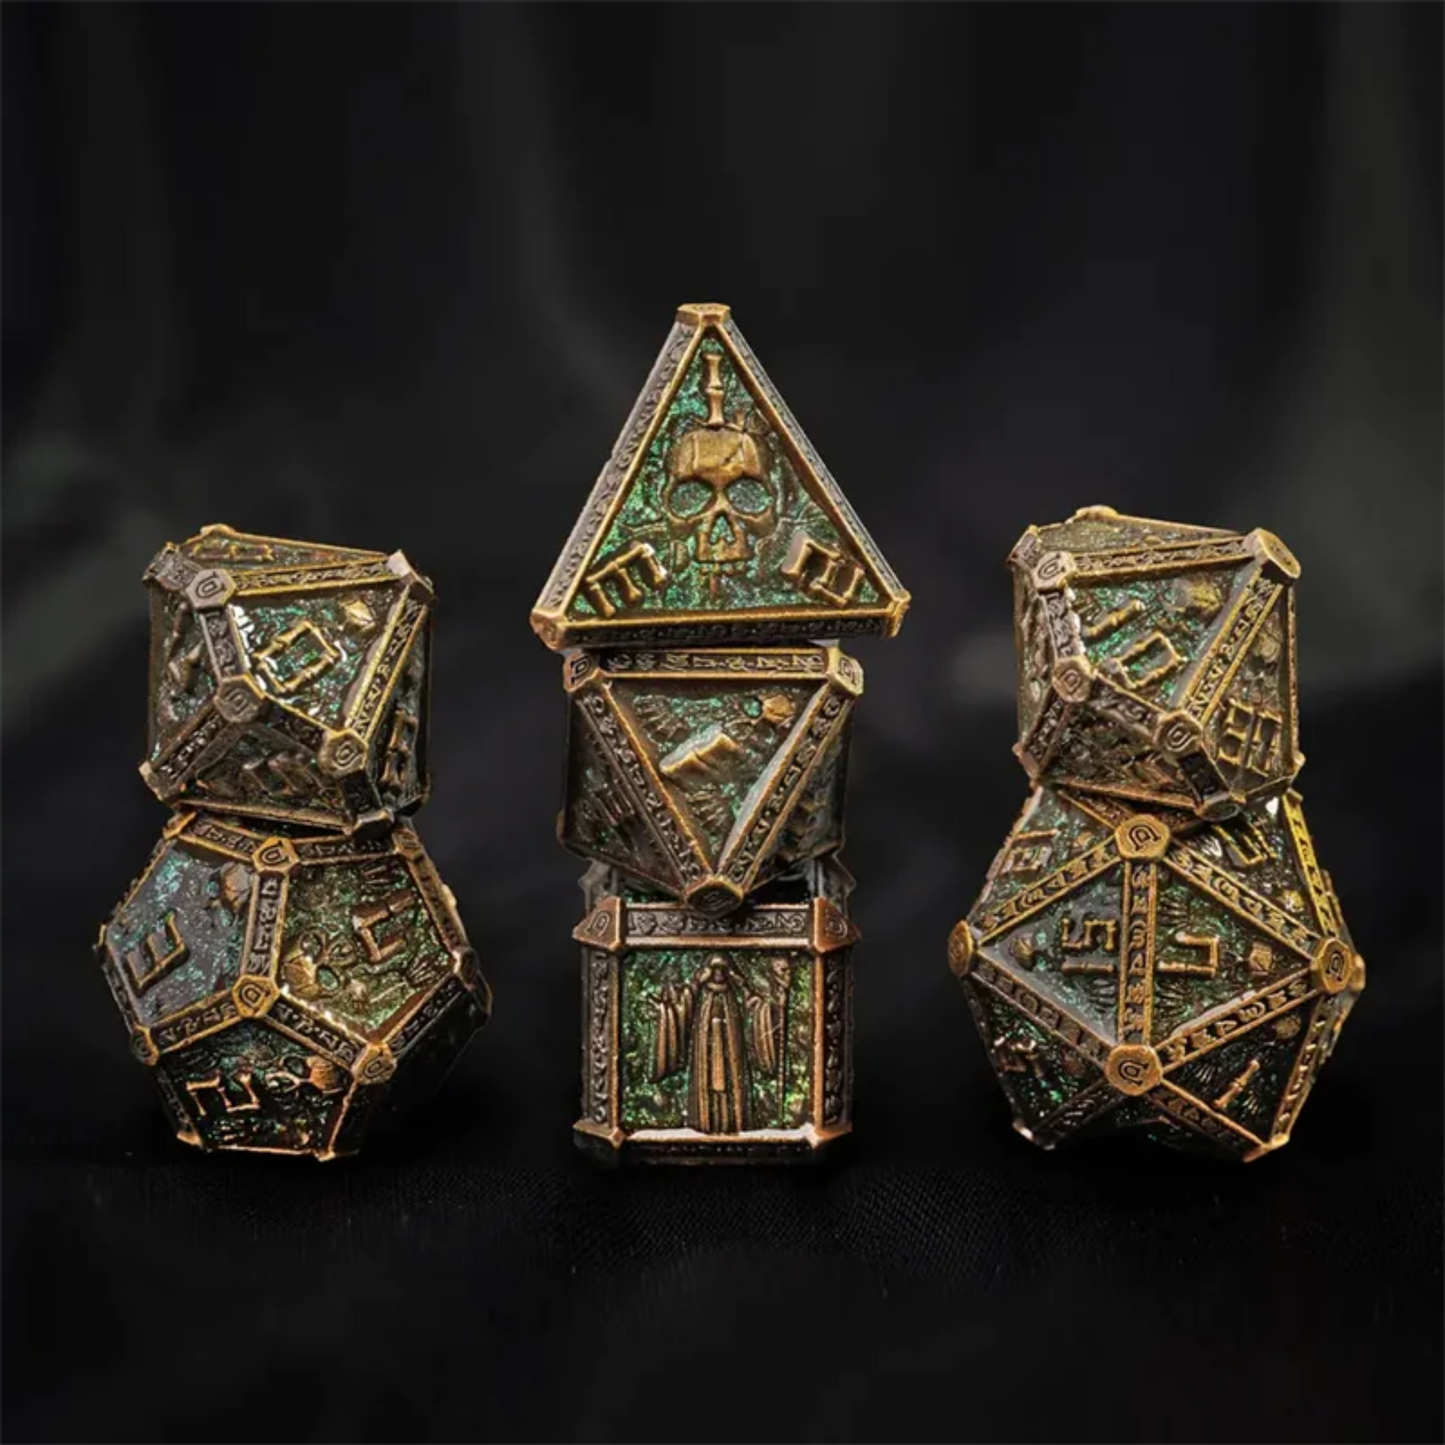 7 Pcs Metal Necromancer Dice Set for D&D and Role Playing Games